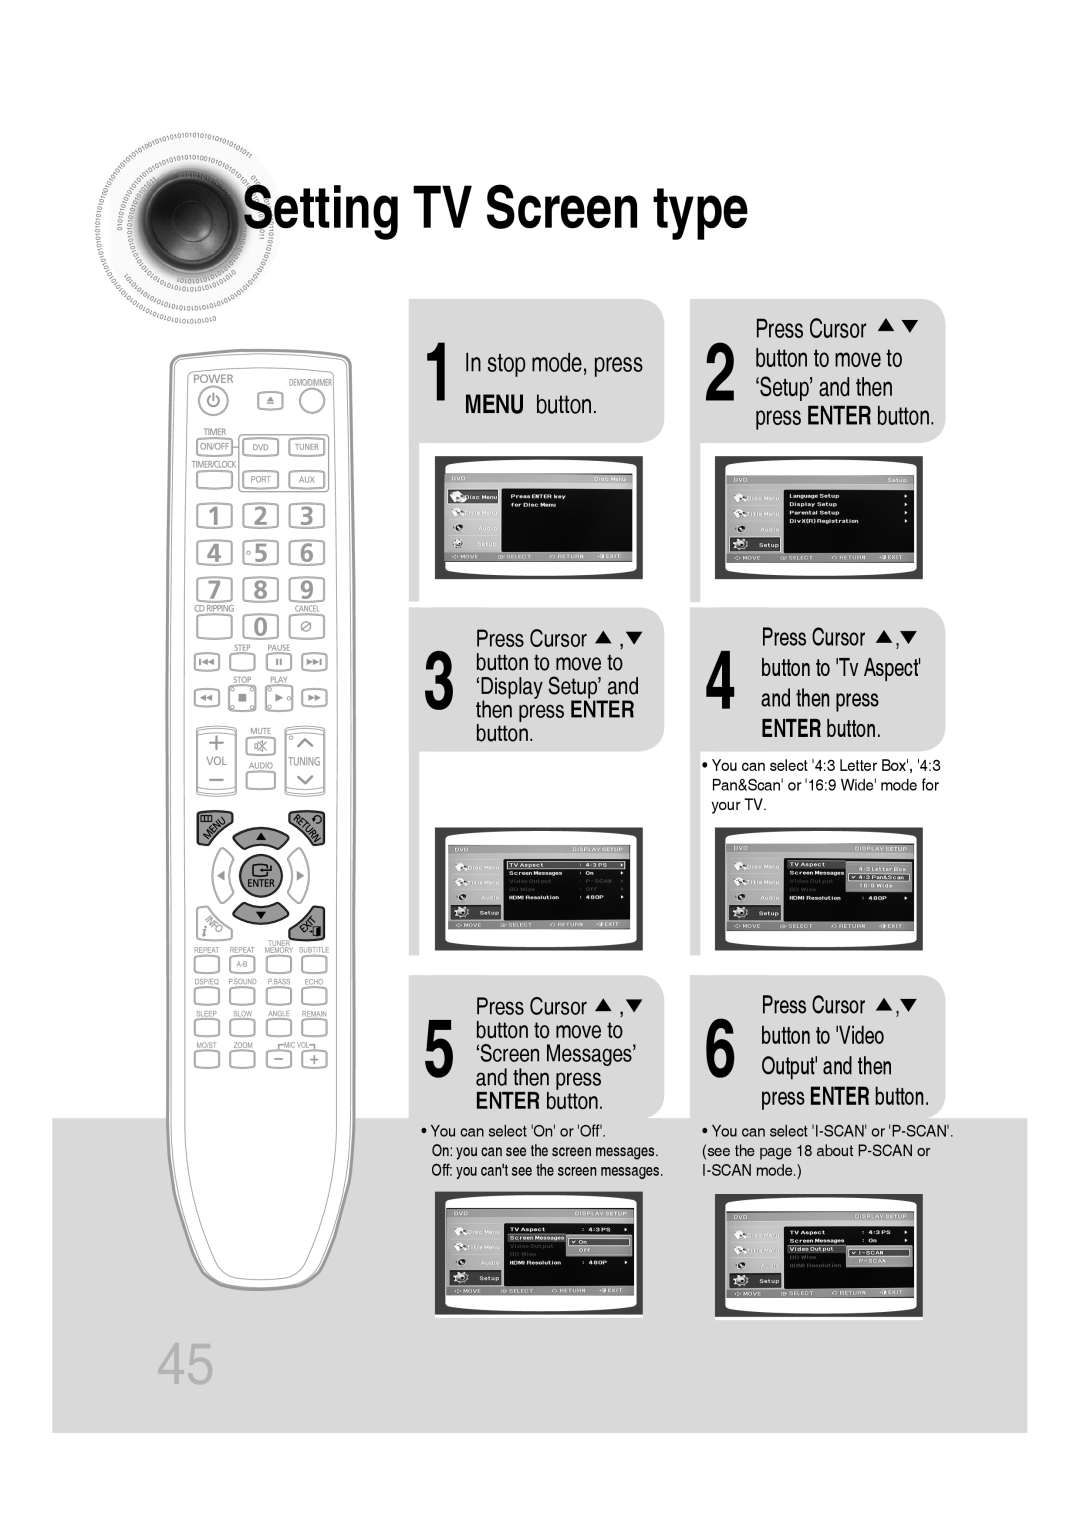 Samsung AH68-02272Y Setting TV Screen type, ‘Display Setup’ and then press ENTER button, In stop mode, press MENU button 